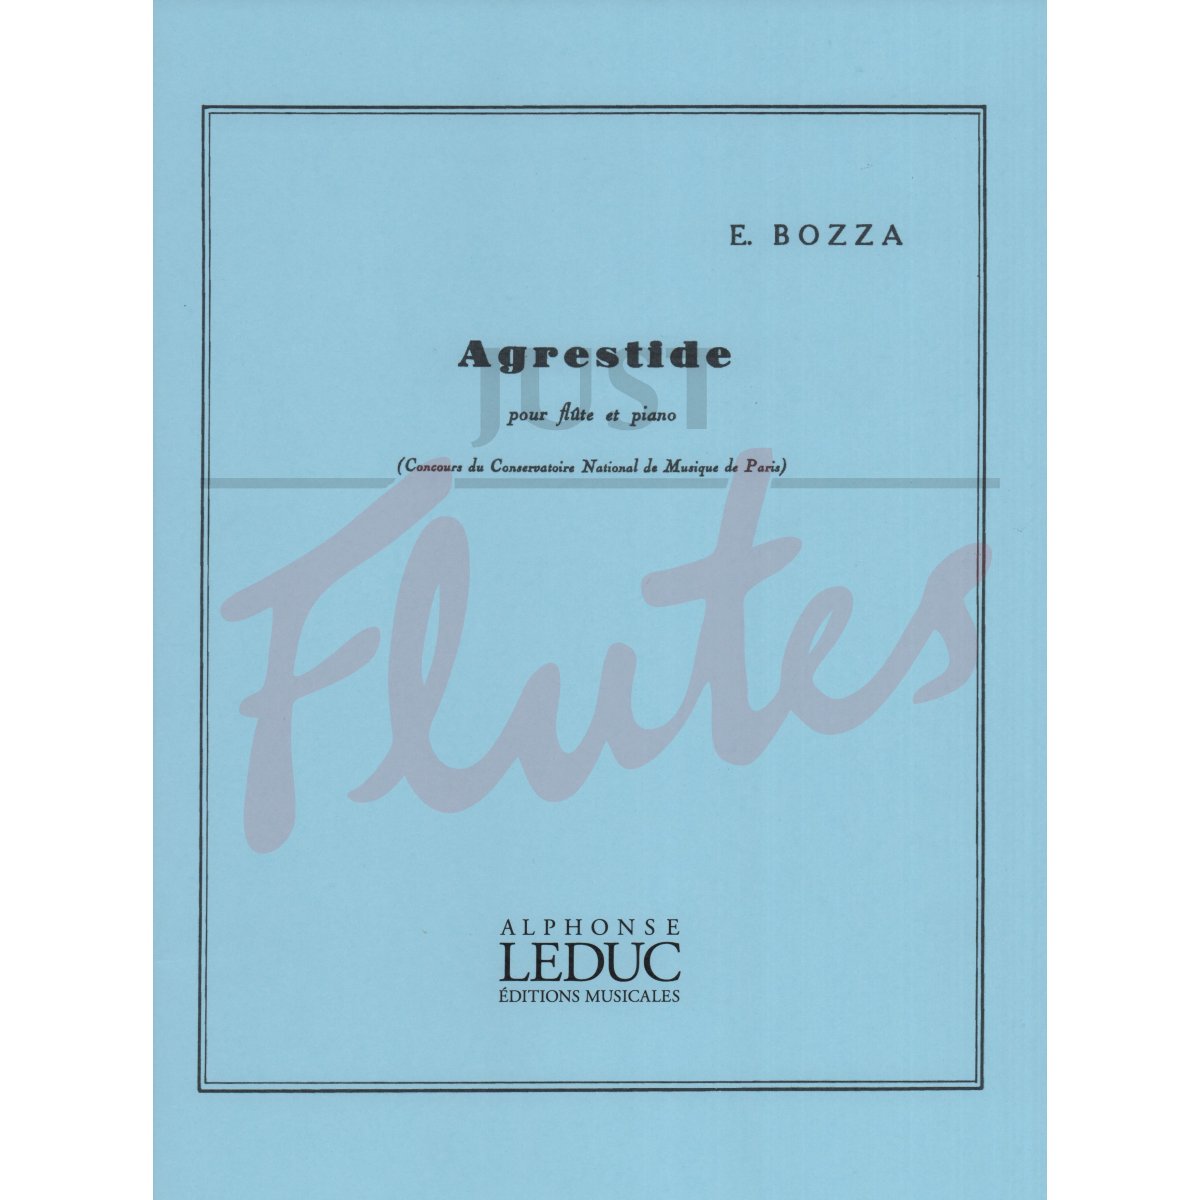 Agrestide for Flute and Piano